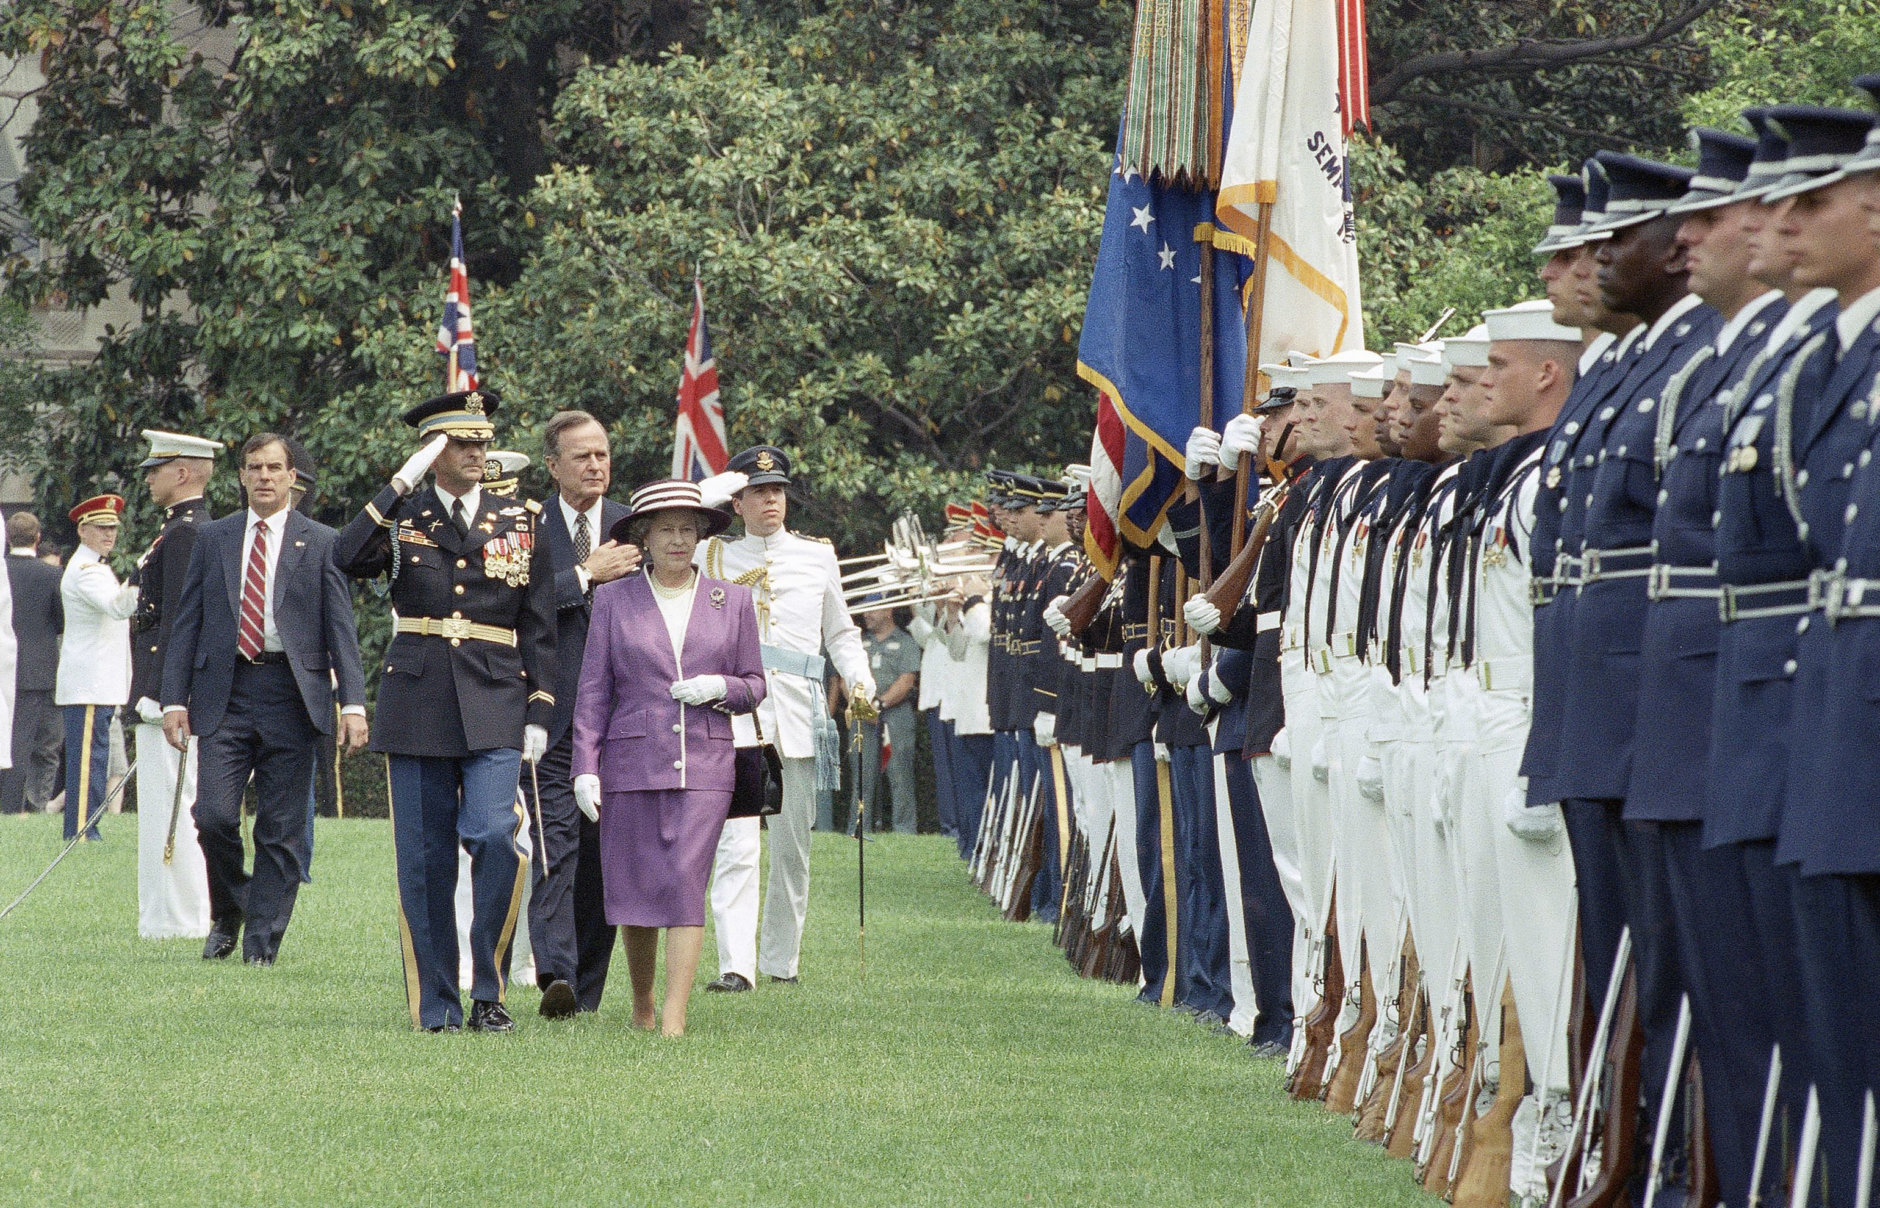 Queen Elizabeth II and President  George H.W. Bush,  along with Commander of Troops Col. Barrie Zais, left, review the troops after the Queen's arrival at the White House on Tuesday, May 14, 1991 in Washington.   The Queen is to spend four days in Washington. (AP Photo/Barry Thumma)